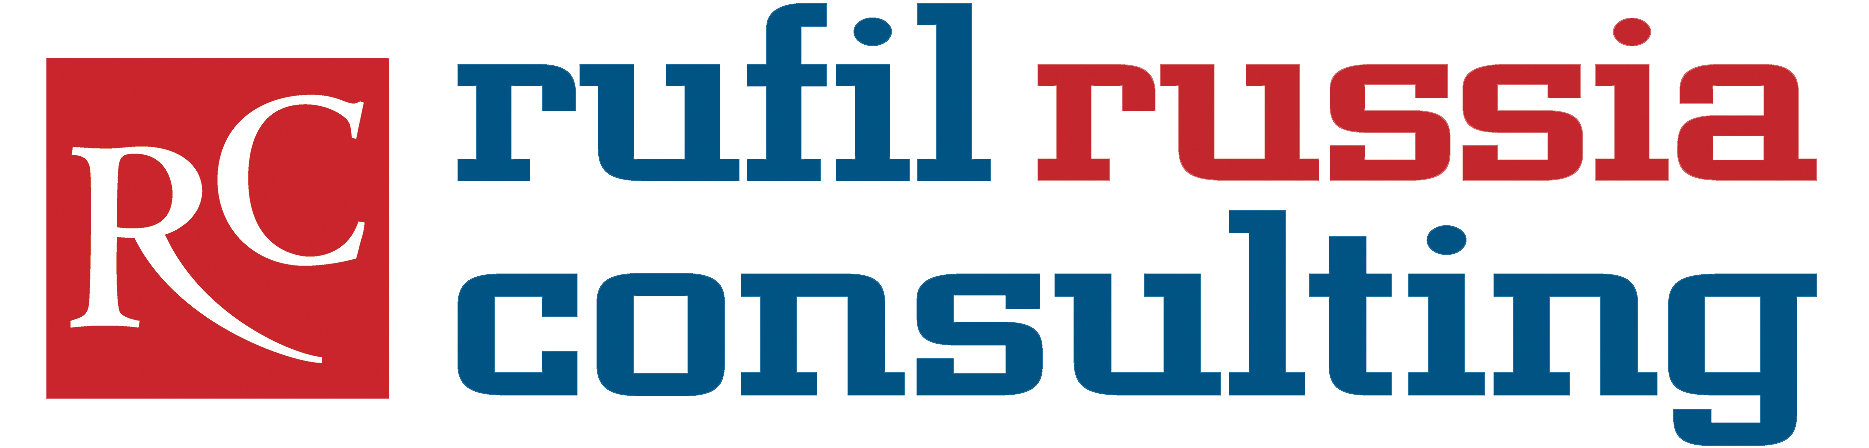 Rufil Russia Consulting | Legal, Tax and Accounting | RU